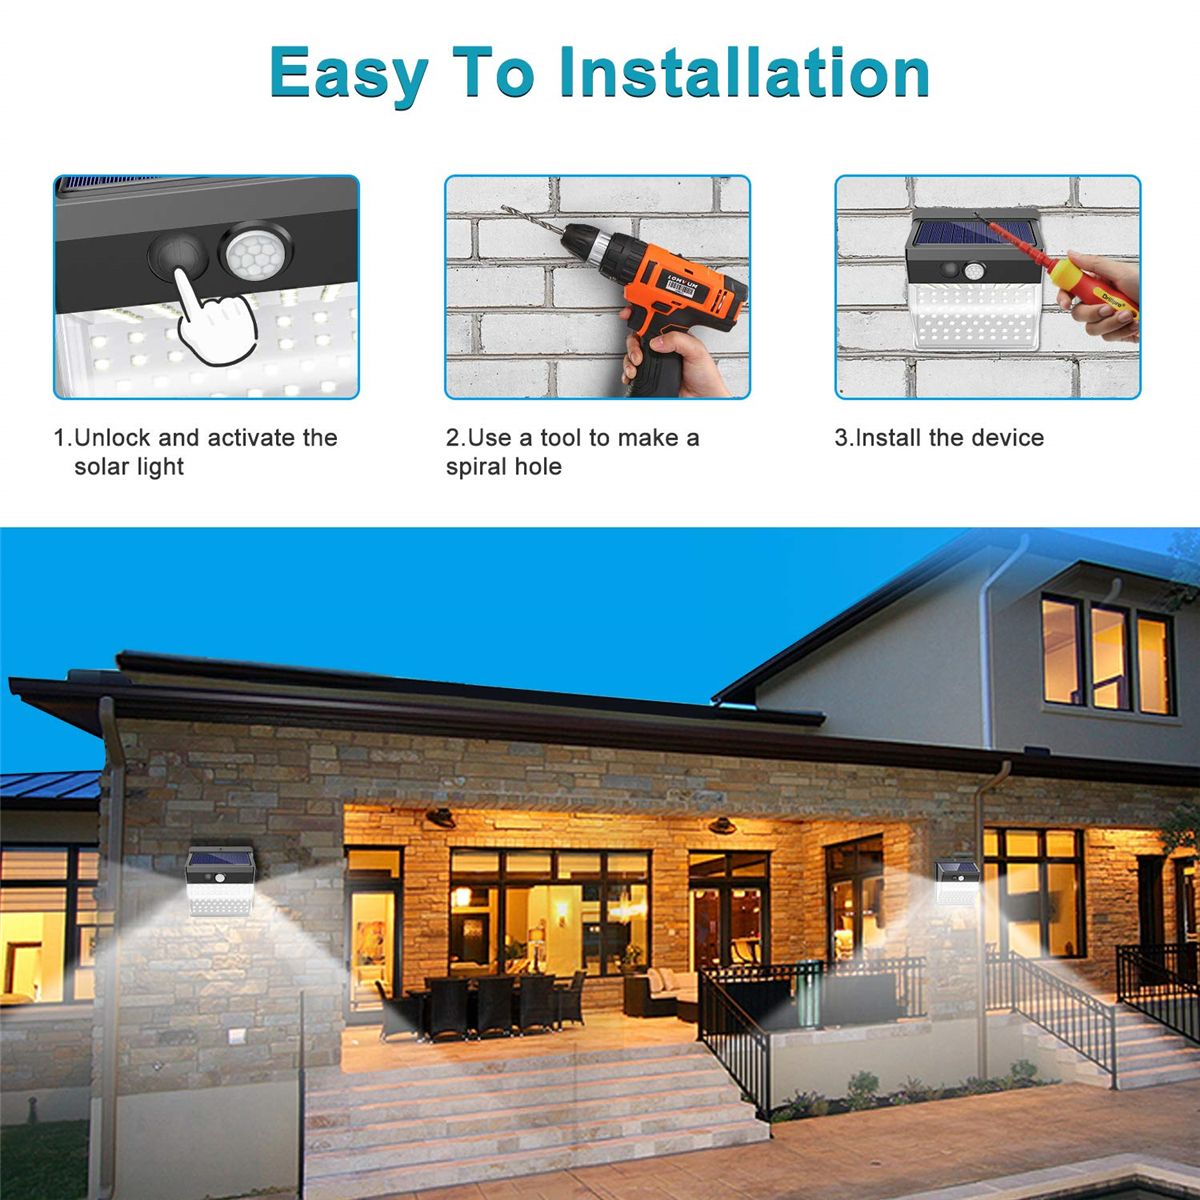 Waterproof-LED-Solar-Light-Body-Induction-Outdoor-Night-Wall-Lamp-for-Garden-Fence-Patio-1680668